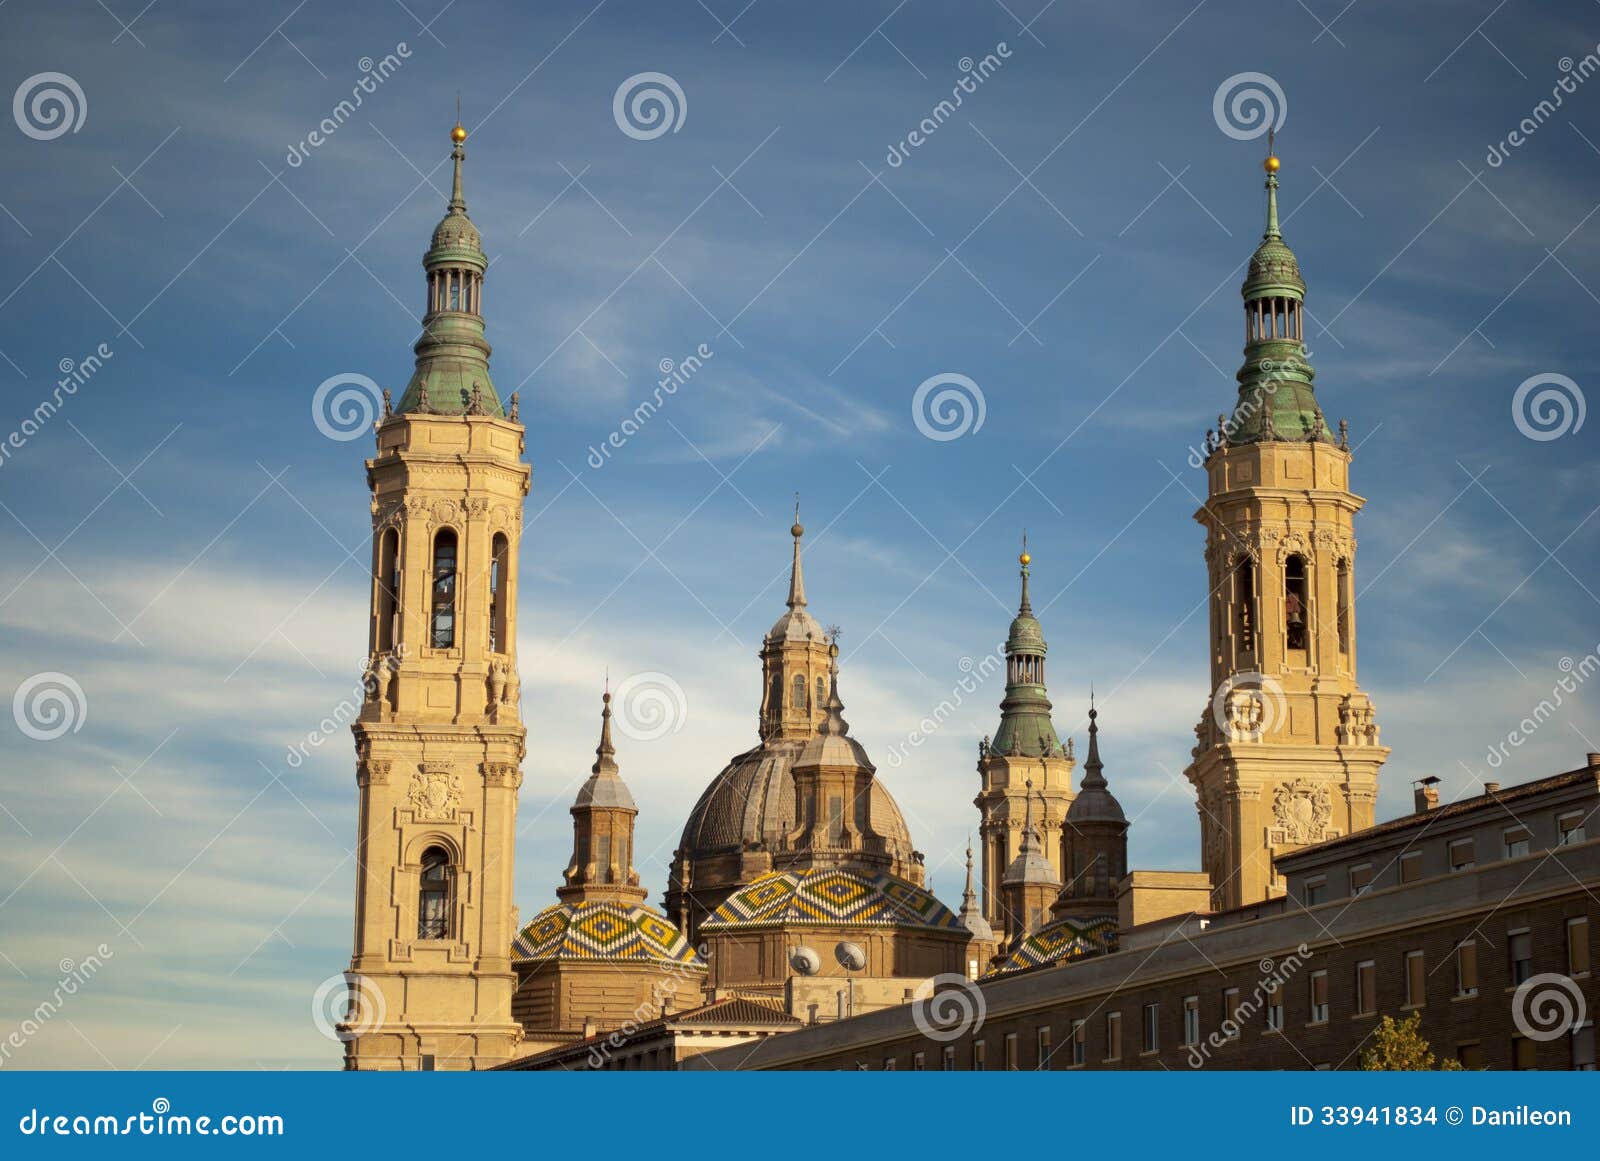 View Of Pilar's Cathedral In Saragossa, Spain Stock Photo - Image of blue, aragon ...1300 x 960